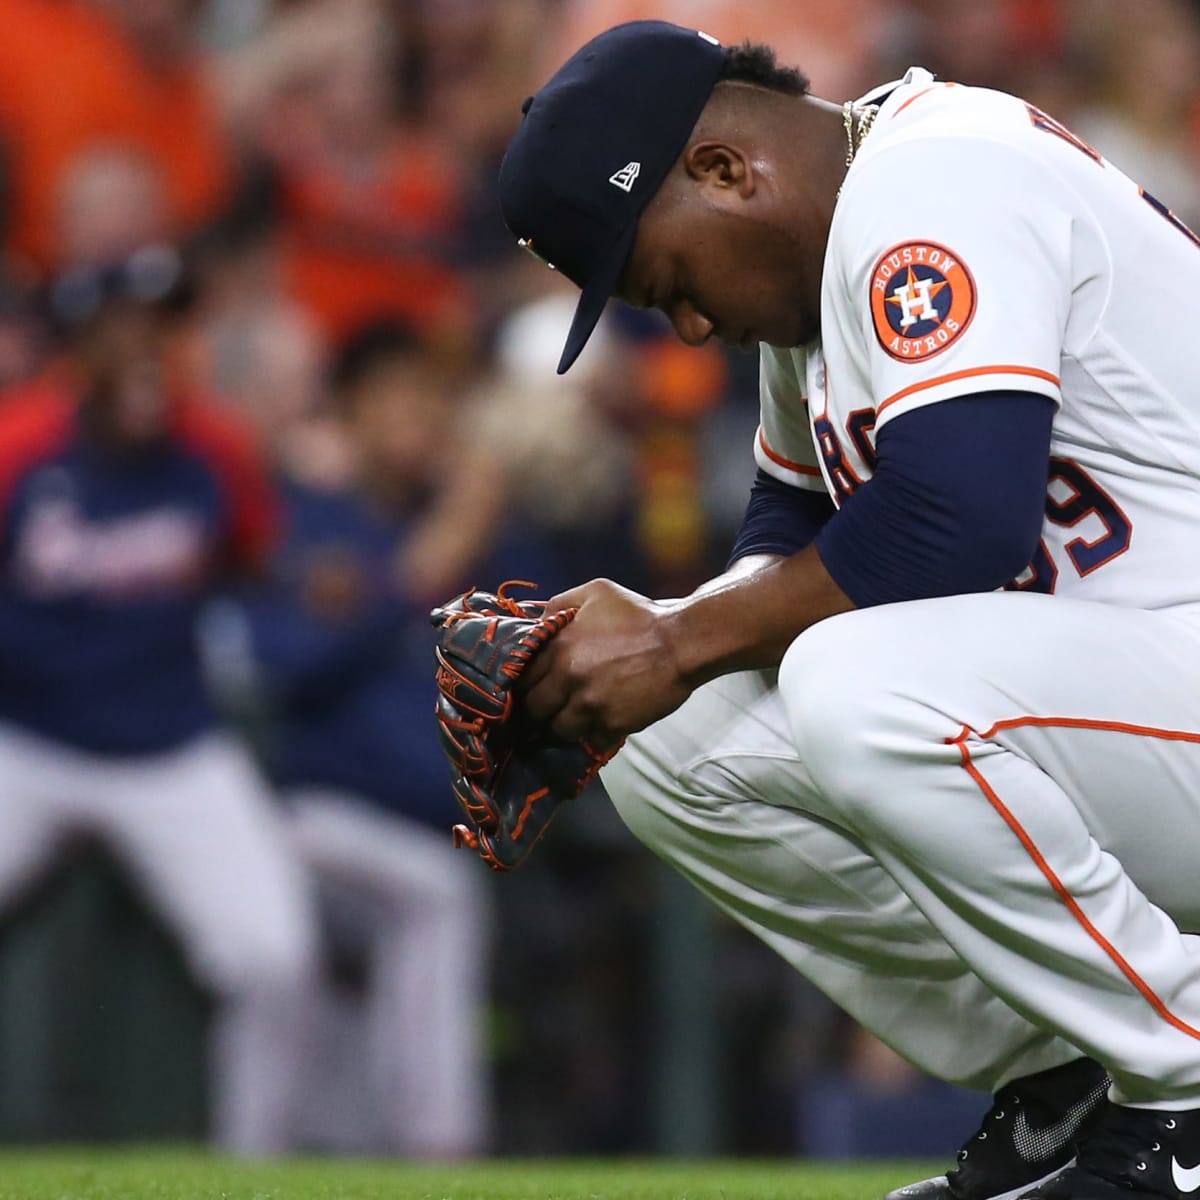 Valdez pitches 1st shutout, Astros blank Tigers 7-0 - The San